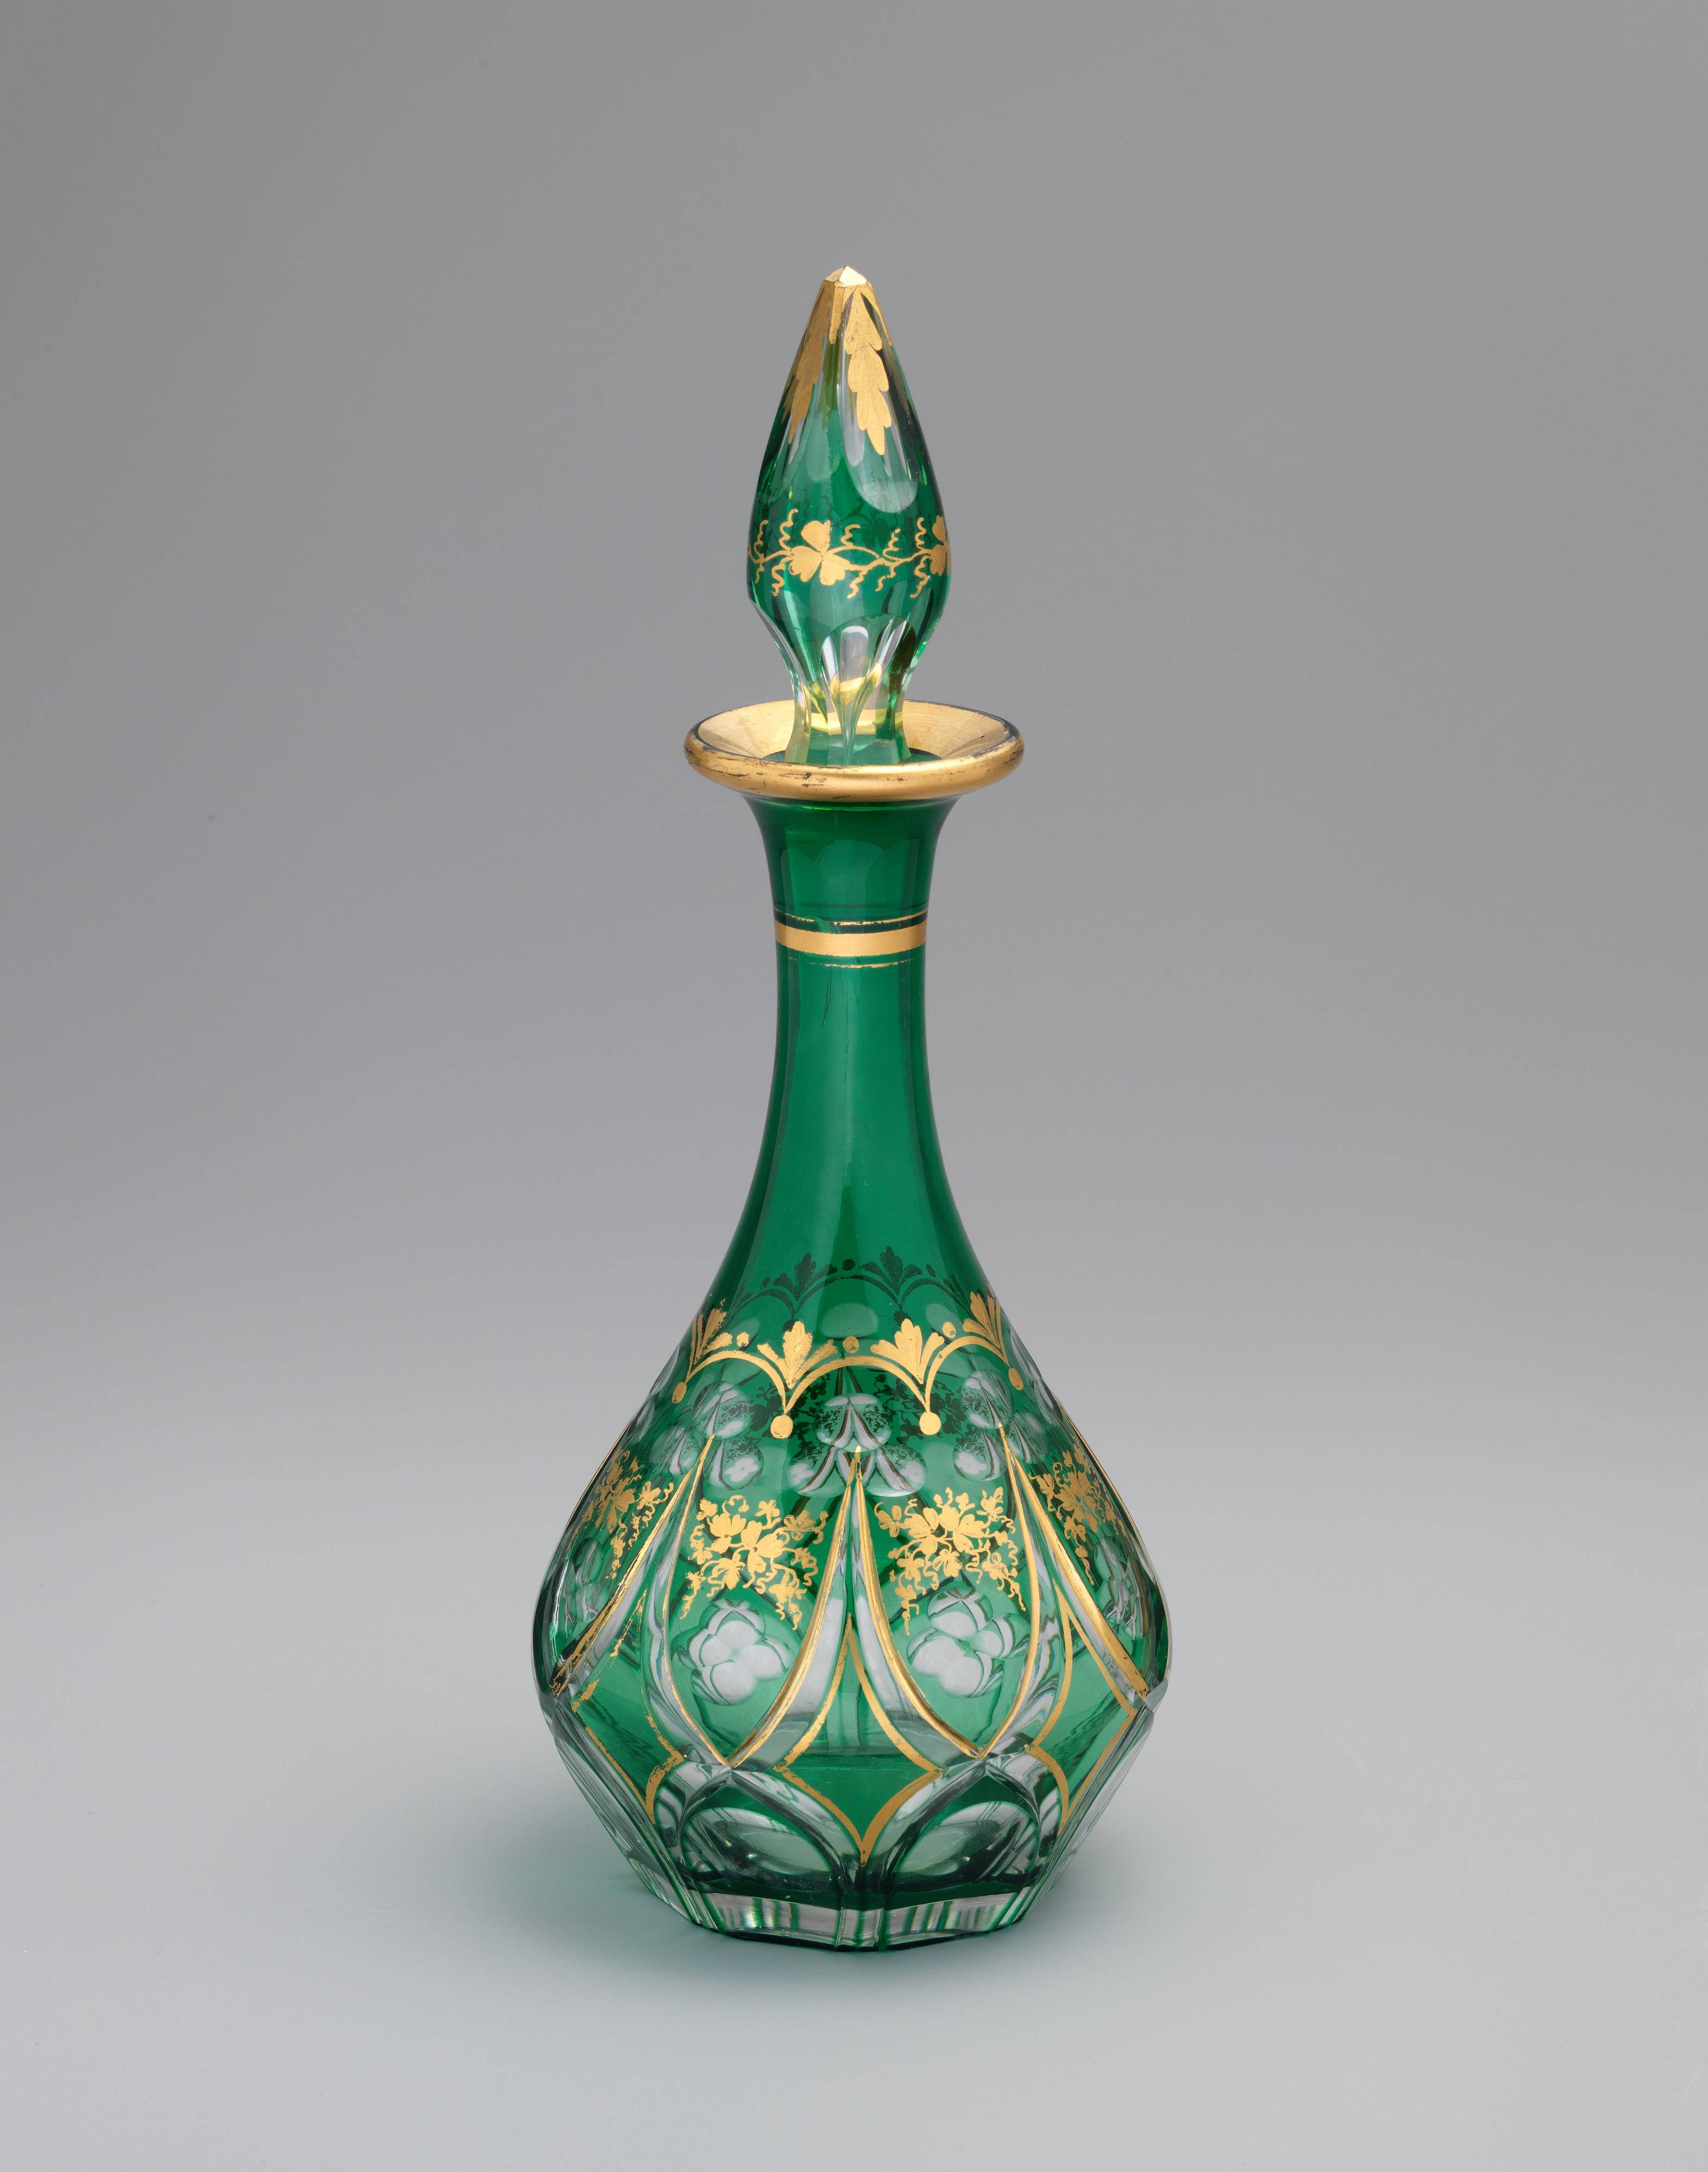 Perfume decanter by the New England Glass Company. American, 1866–1870.jpg